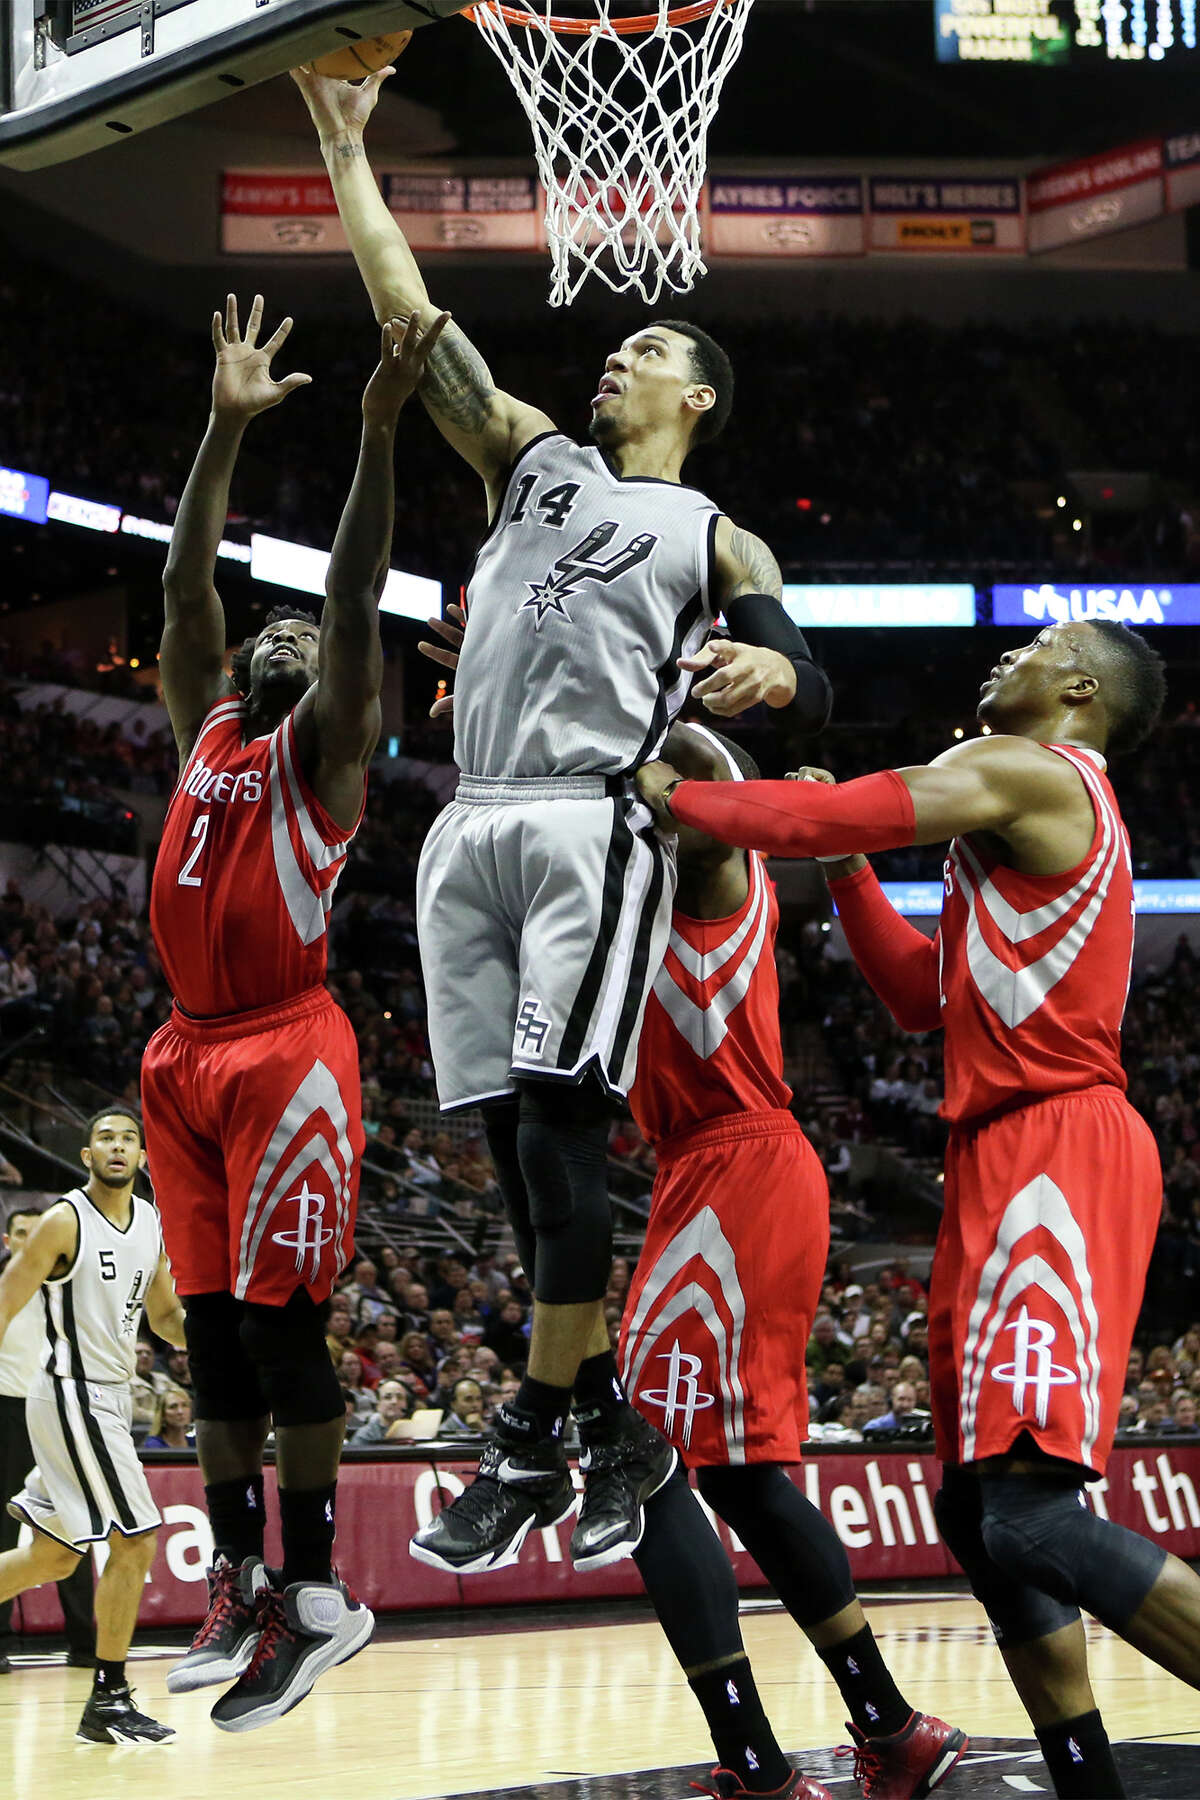 Danny Green puts up a layup during the first half. Green scored 24 to help the Spurs beat the Rockets.